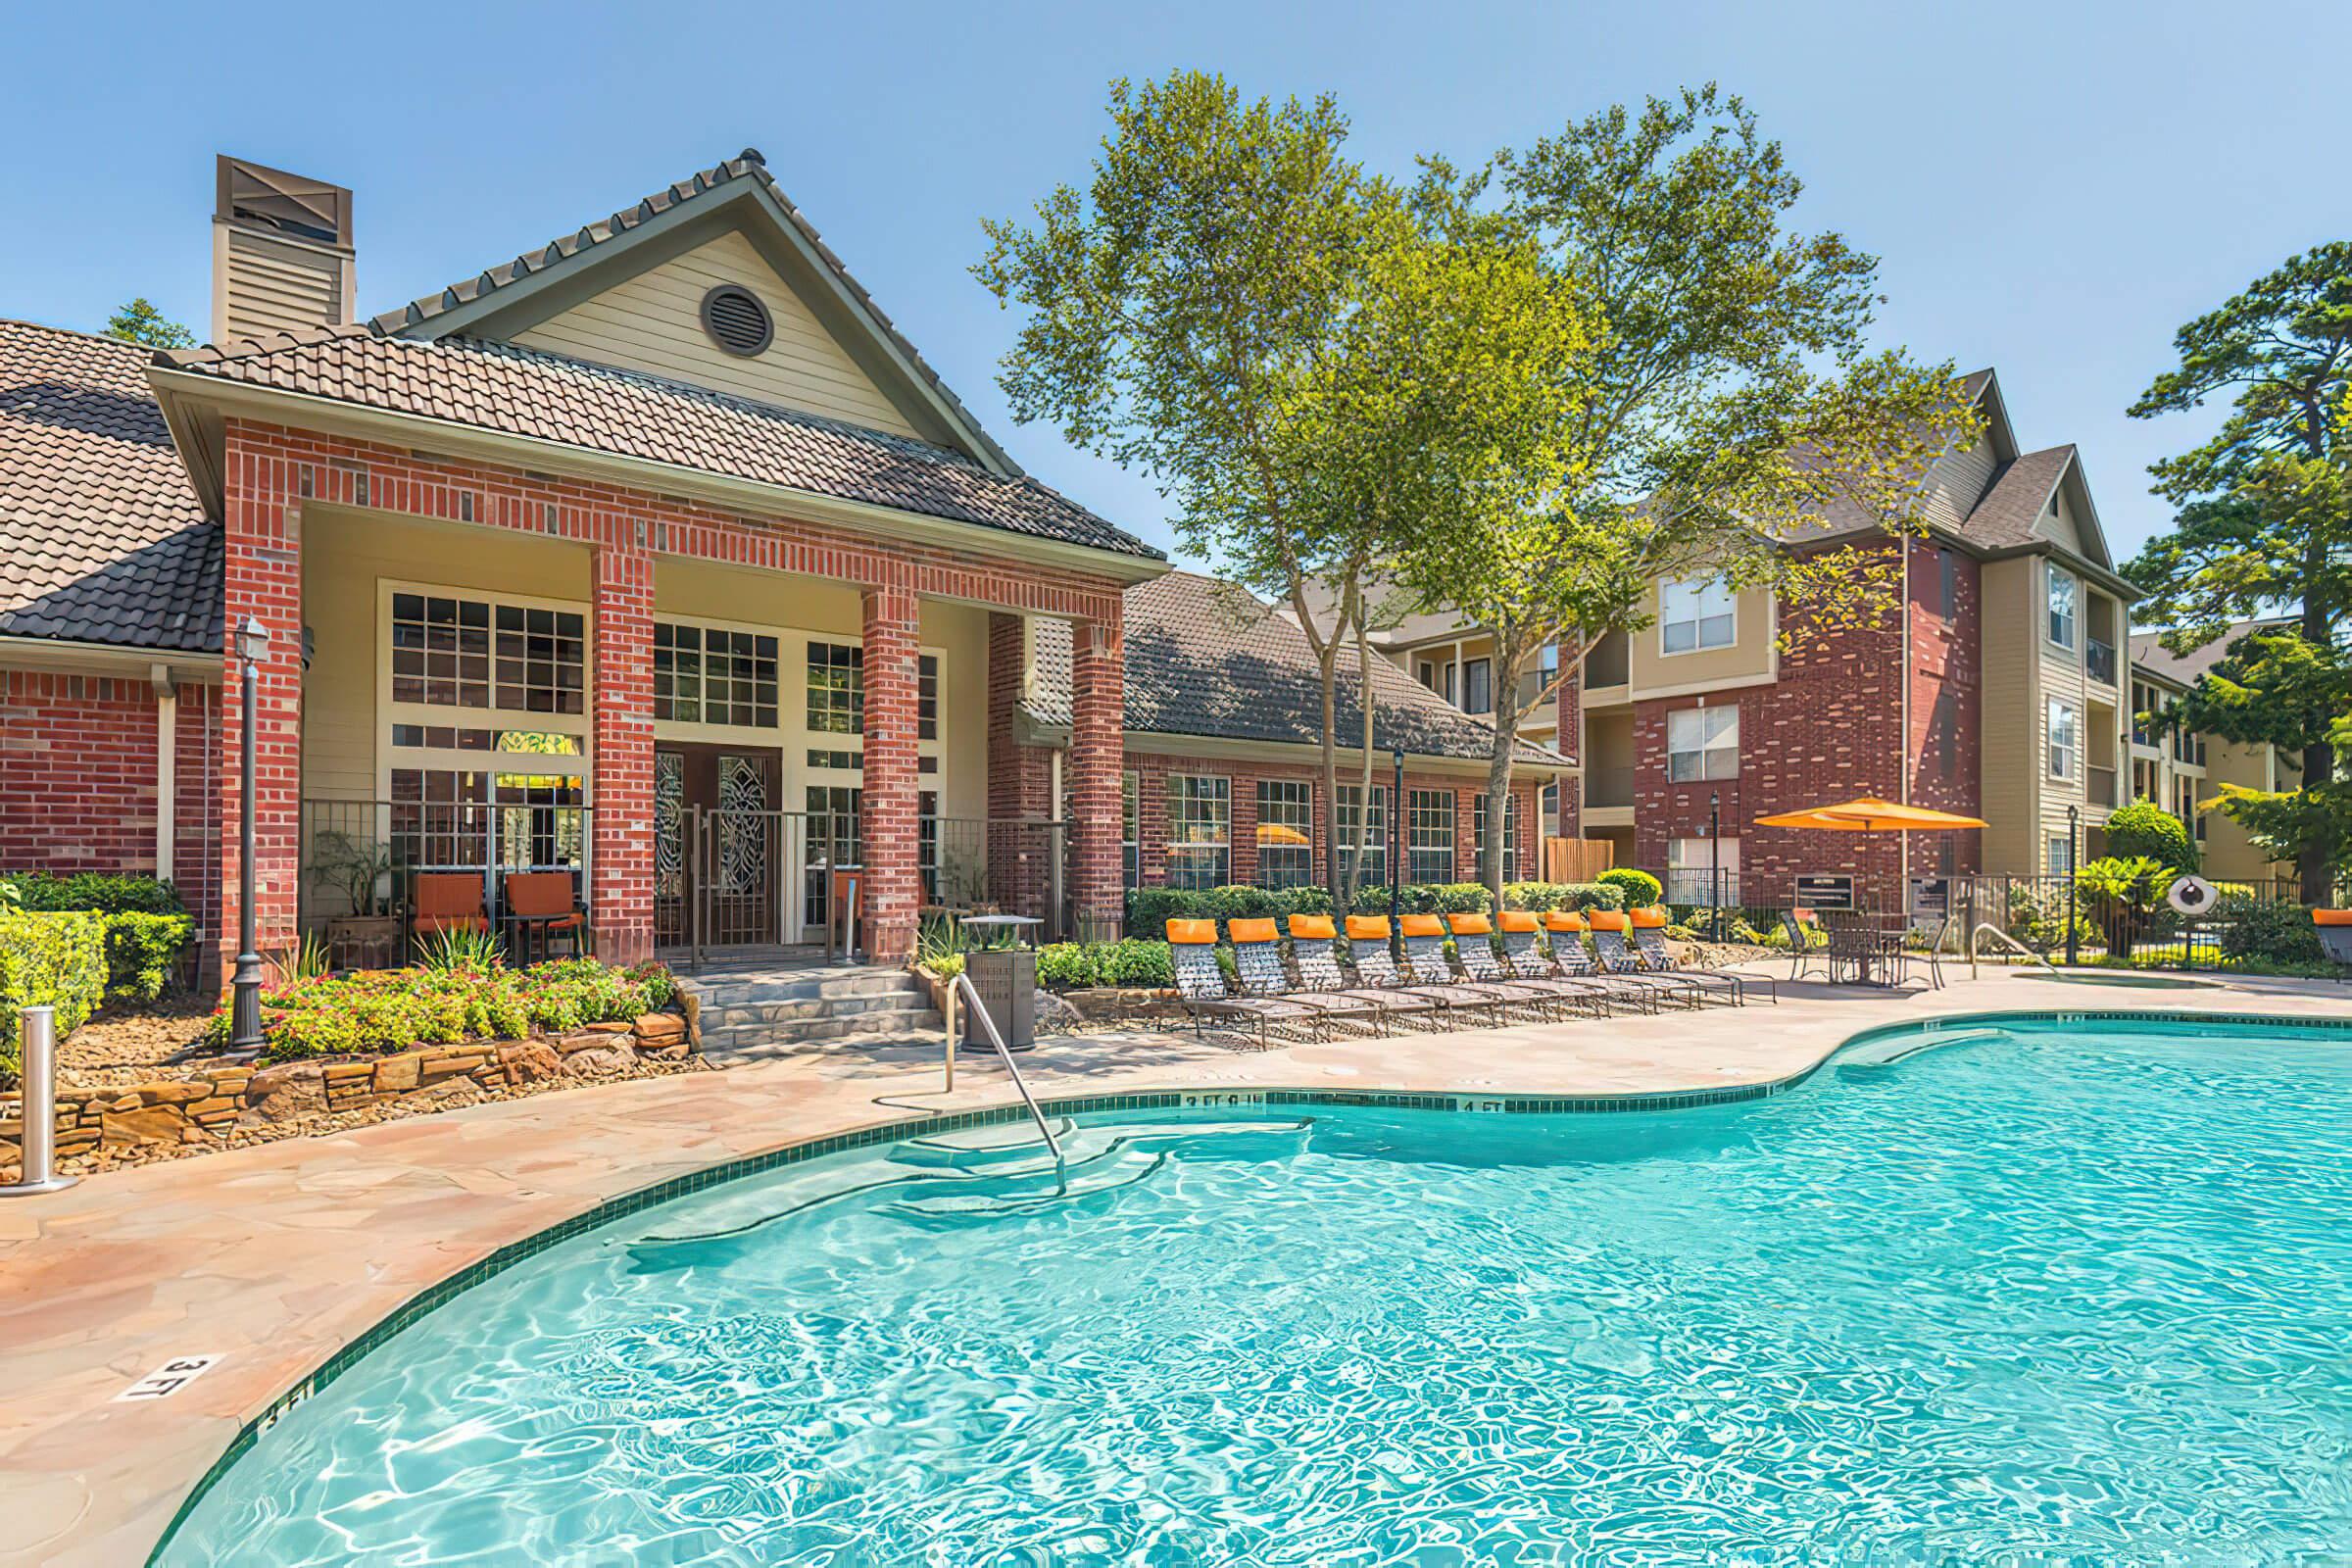 THE POOL AT WILDWOOD FOREST APARTMENTS